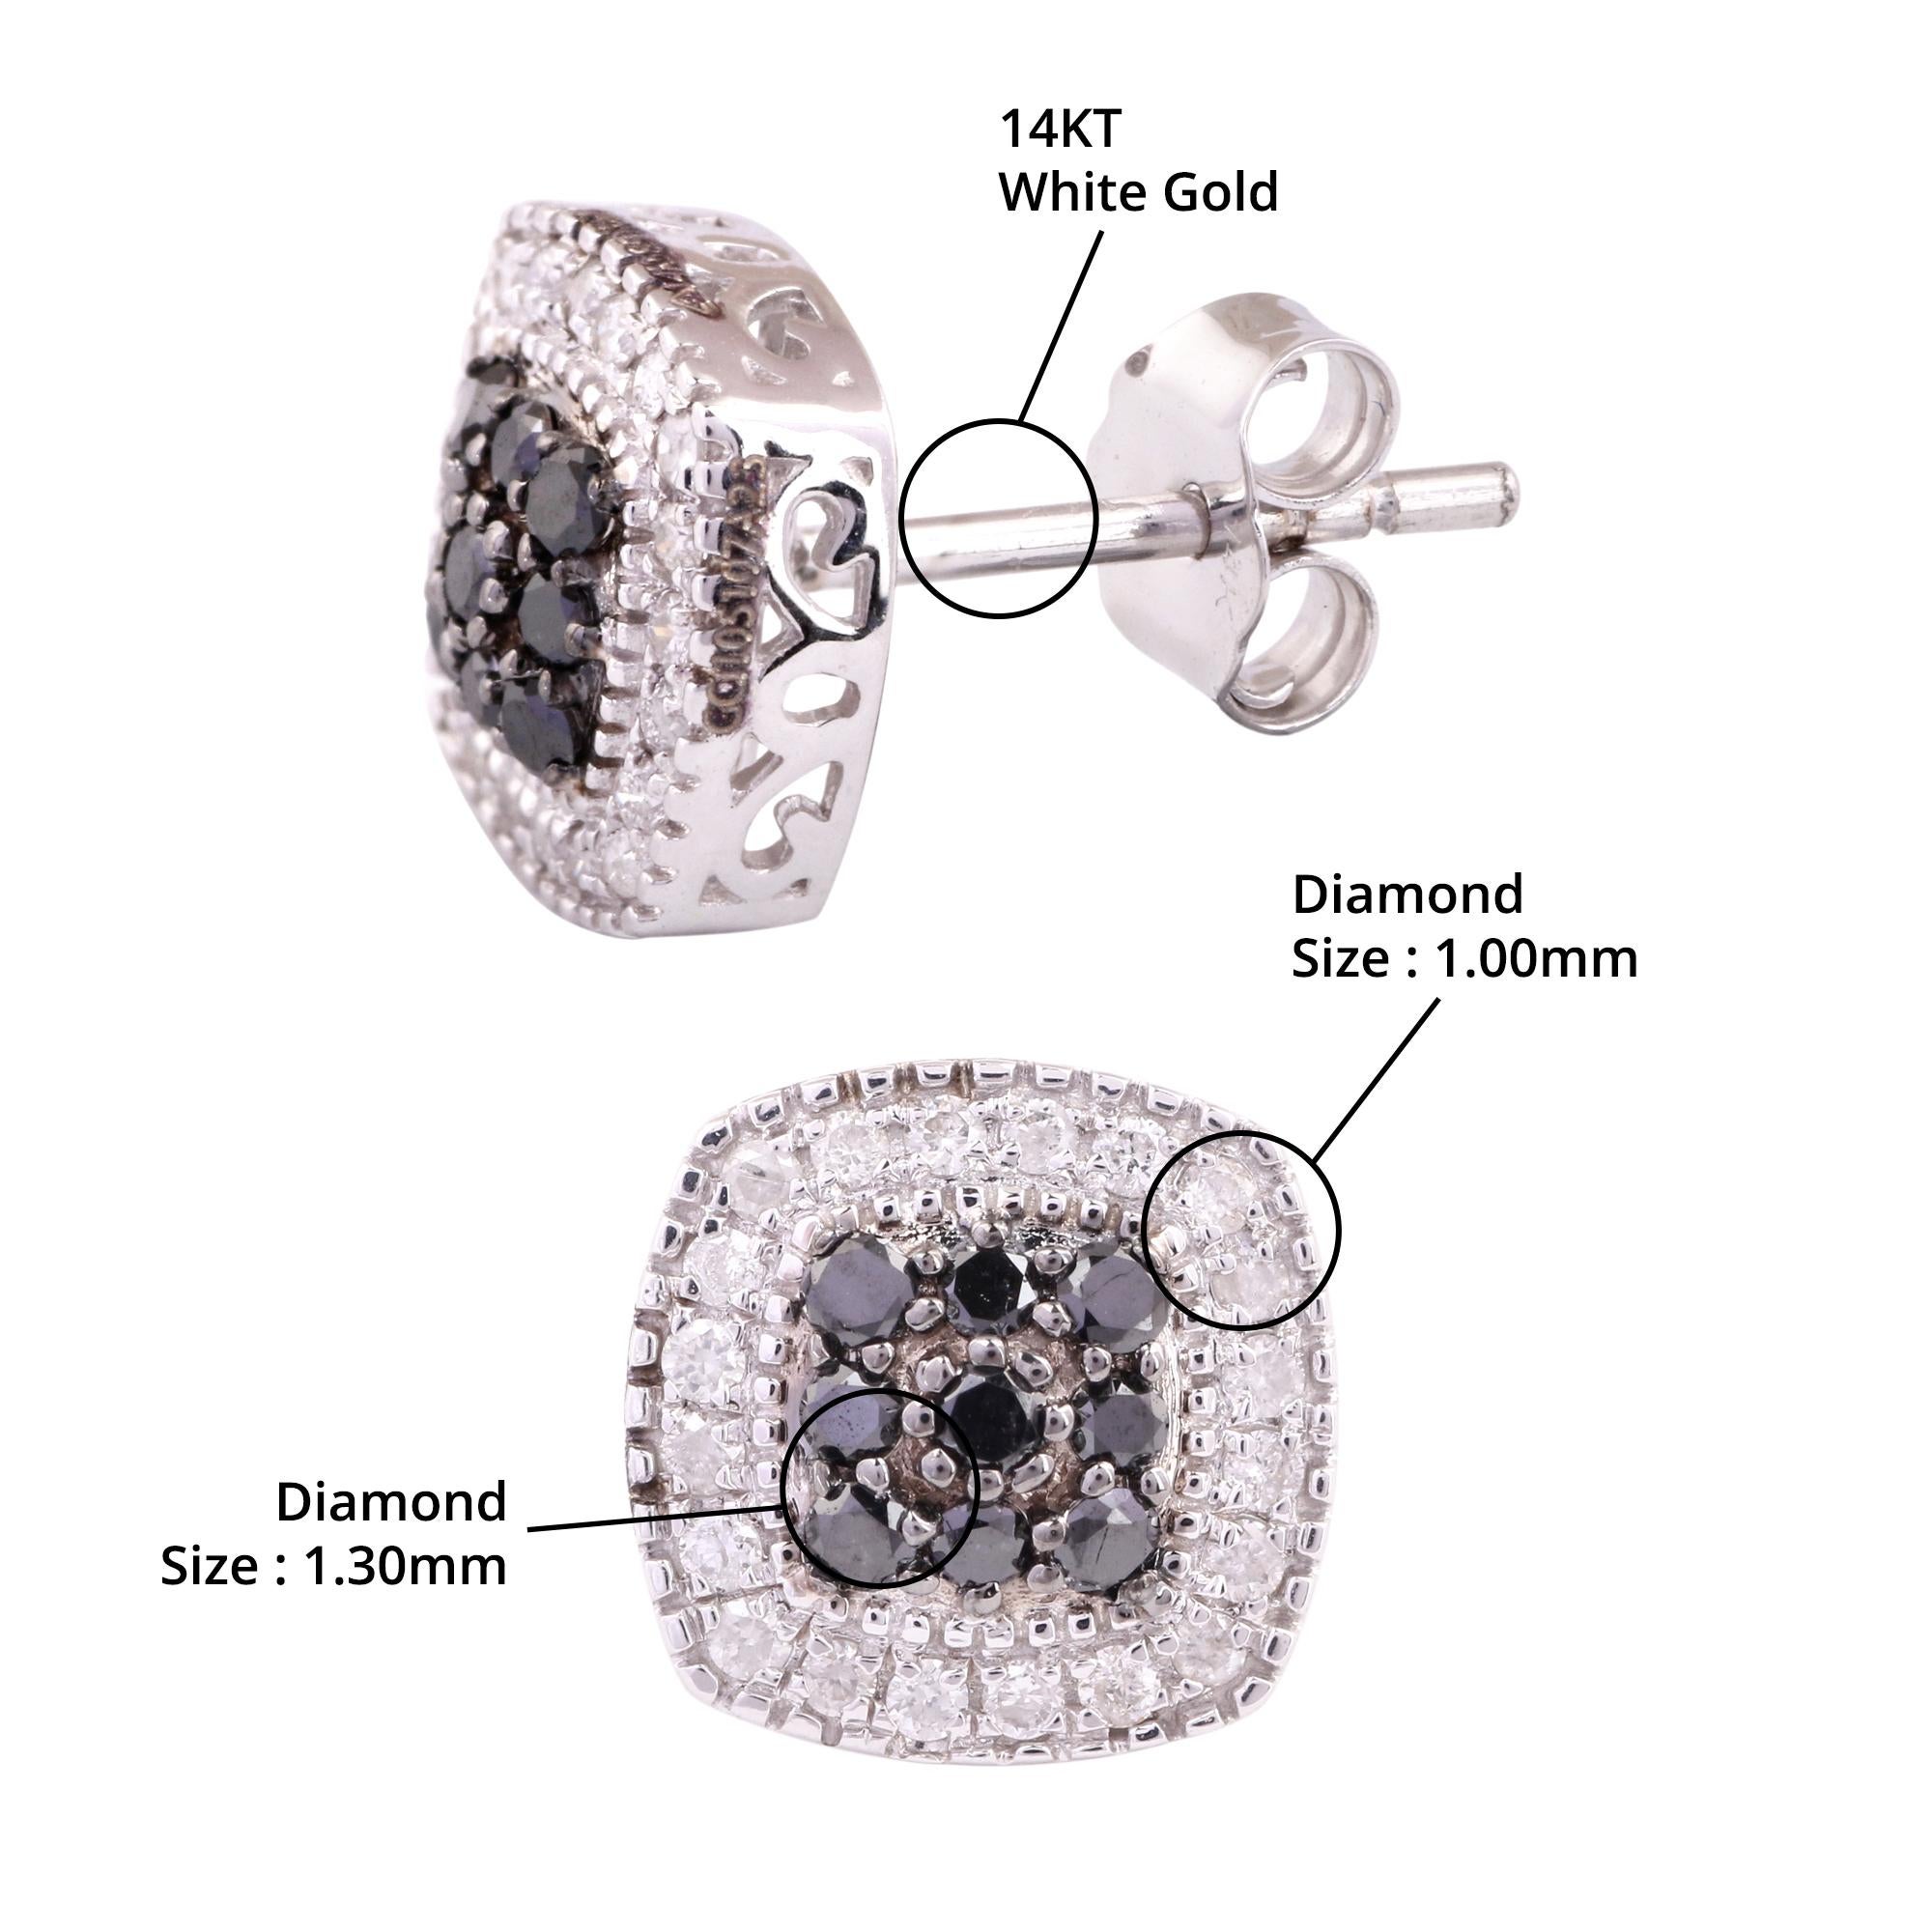 Item details:-

✦ SKU:- JER00717WWW

✦ Material :- Gold

✦ Metal Purity : 14K White Gold 

✦ Gemstone Specification:-
✧ Clear Diamond (l1/HI) Round - 1mm - 40 Pcs
✧ Real Black Diamond - 1.30mm - 40 Pcs
✧ Real Black Diamond - 1.40mm - 40 Pcs


✦